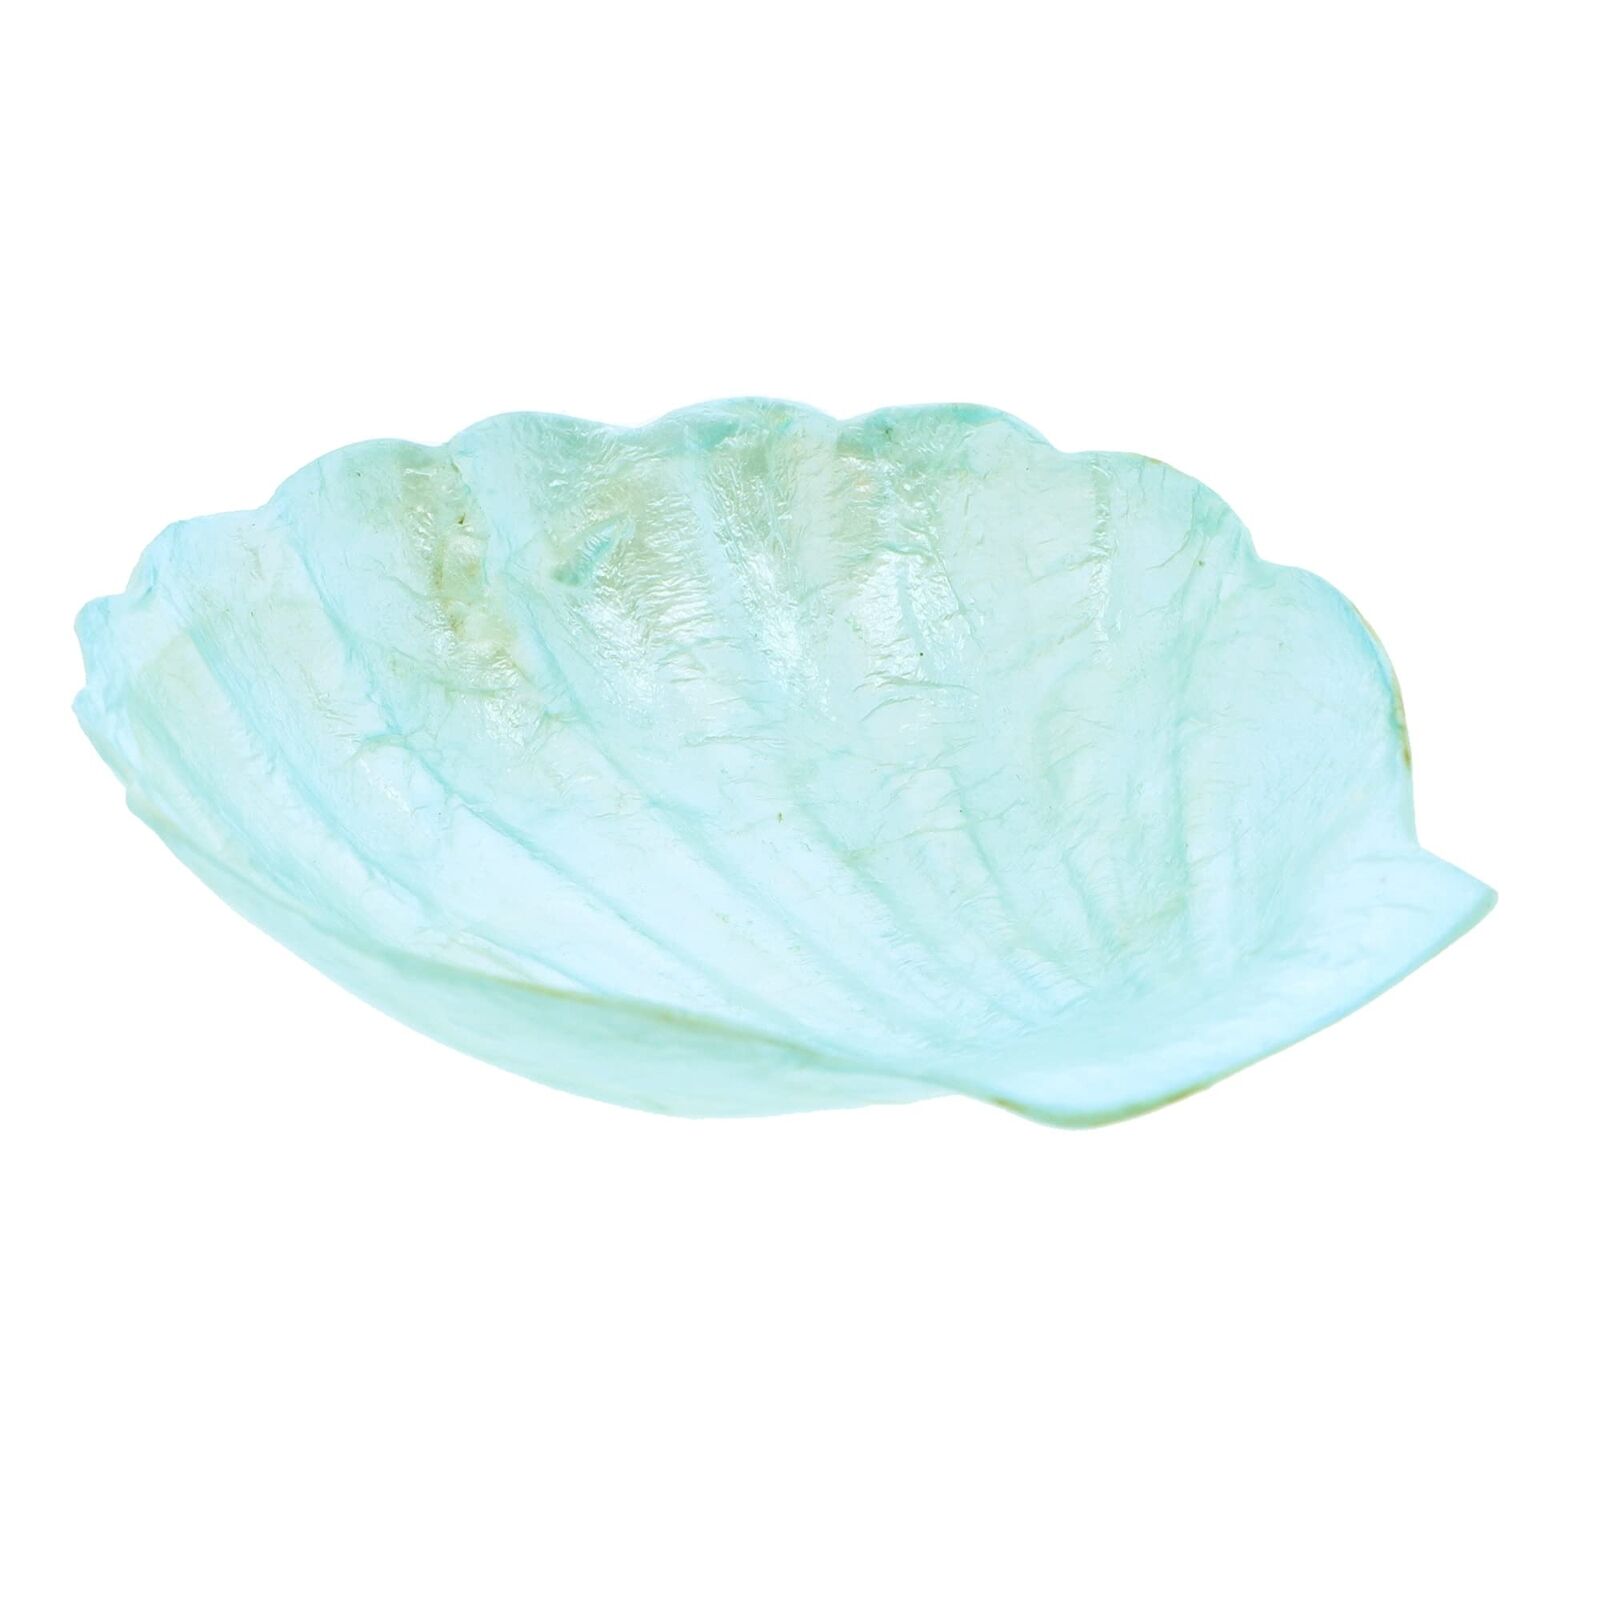 Capiz Dish Scalloped Clam Shape Oyster Shell Trinket Jewelry Tray - Turquoise